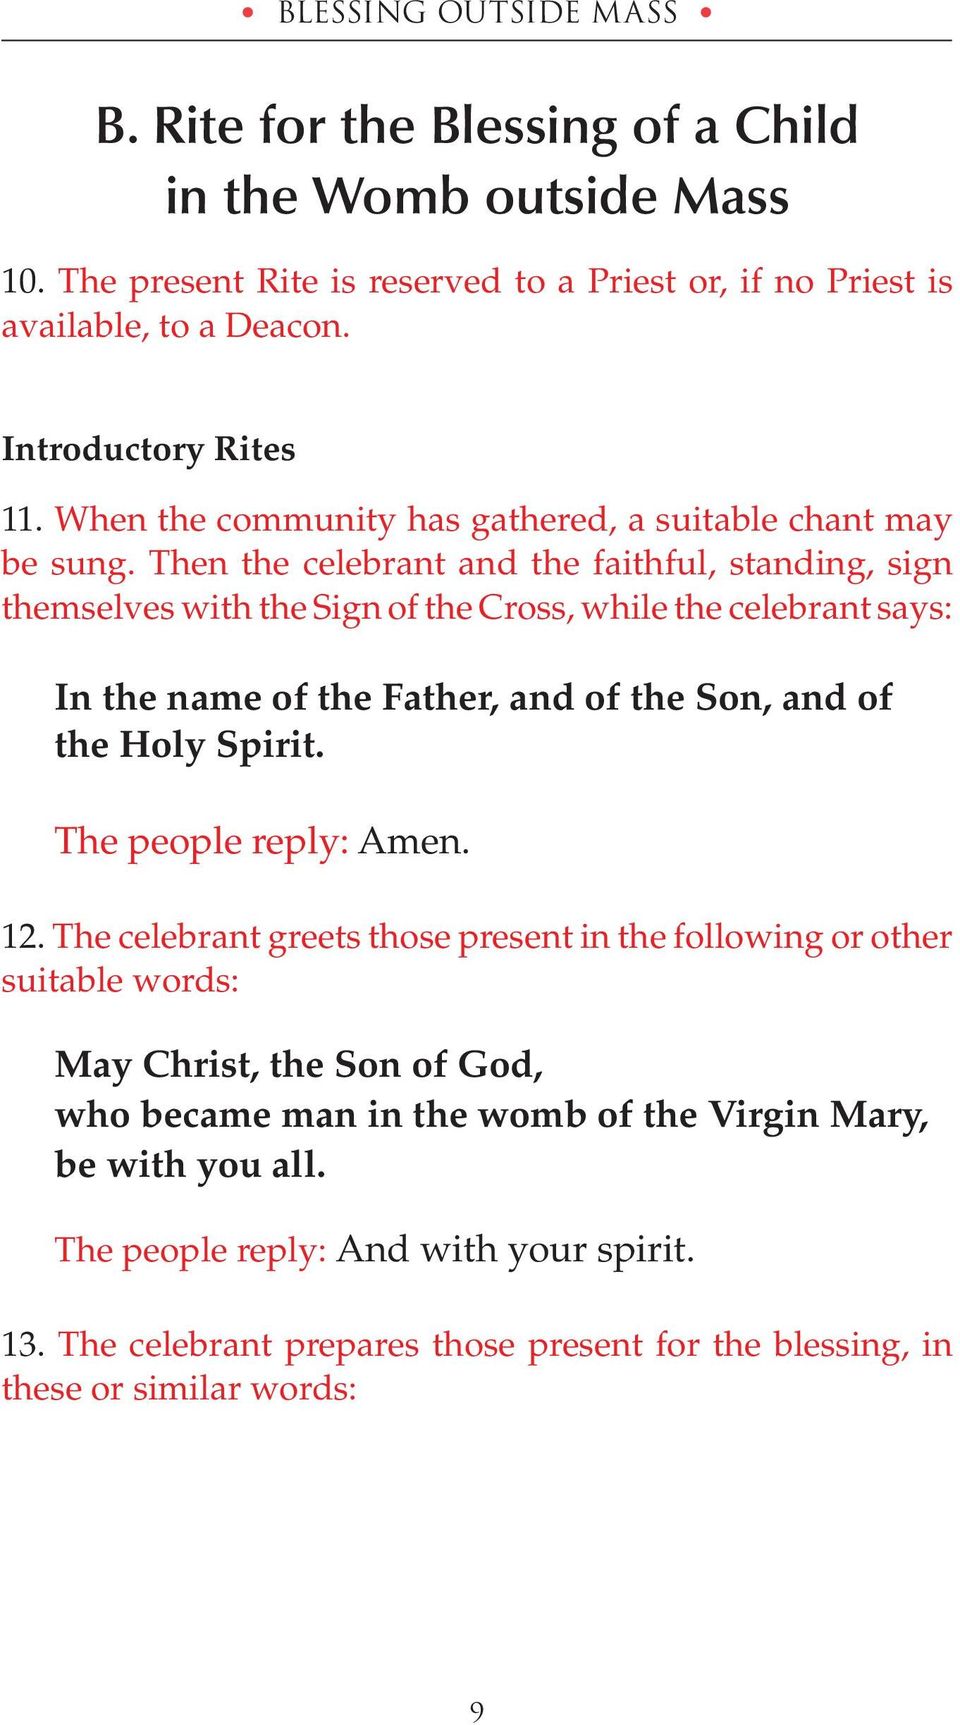 Then the celebrant and the faithful, standing, sign themselves with the Sign of the Cross, while the celebrant says: In the name of the Father, and of the Son, and of the Holy Spirit.